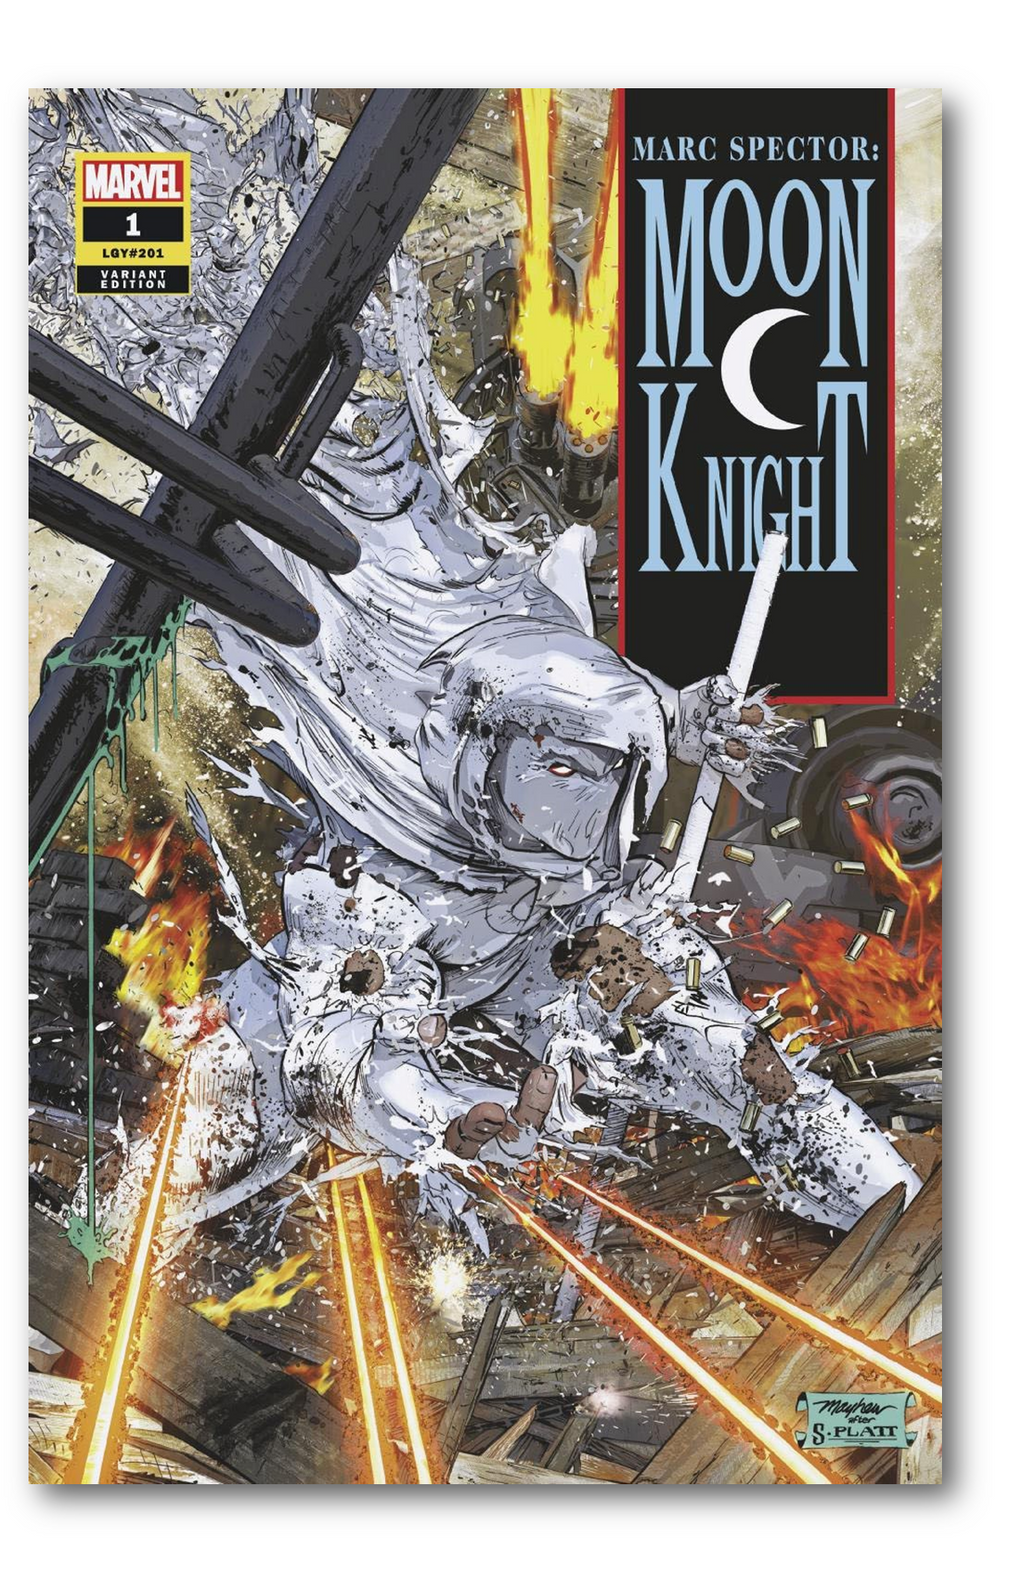 MOON KNIGHT #1 MIKE MAYHEW EXCLUSIVE OPTIONS